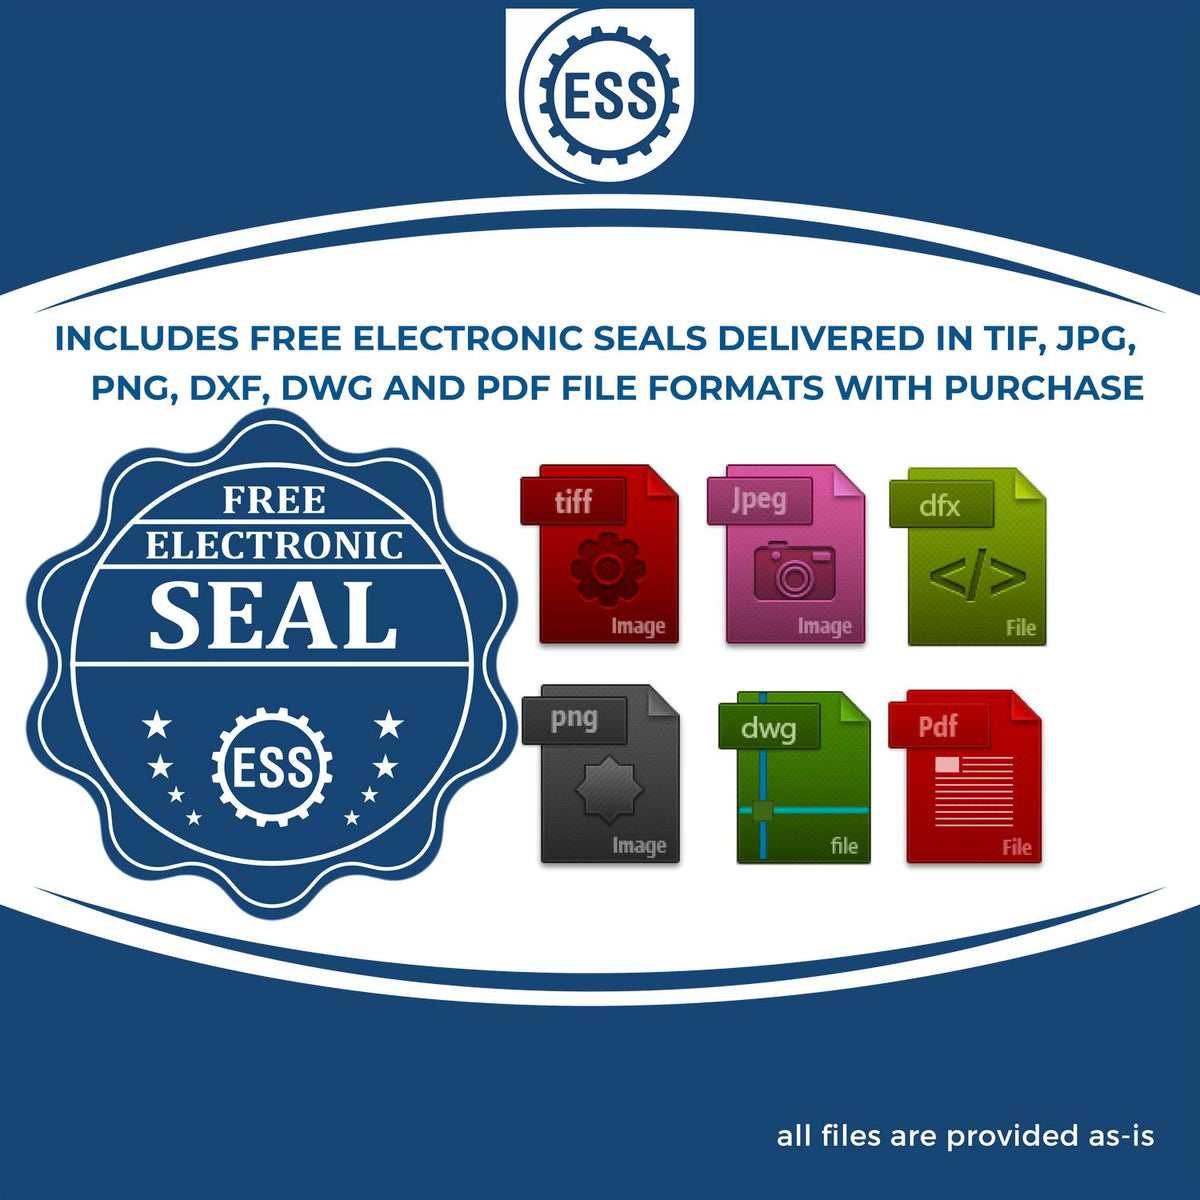 An infographic for the free electronic seal for the Self-Inking Nebraska Landscape Architect Stamp illustrating the different file type icons such as DXF, DWG, TIF, JPG and PNG.